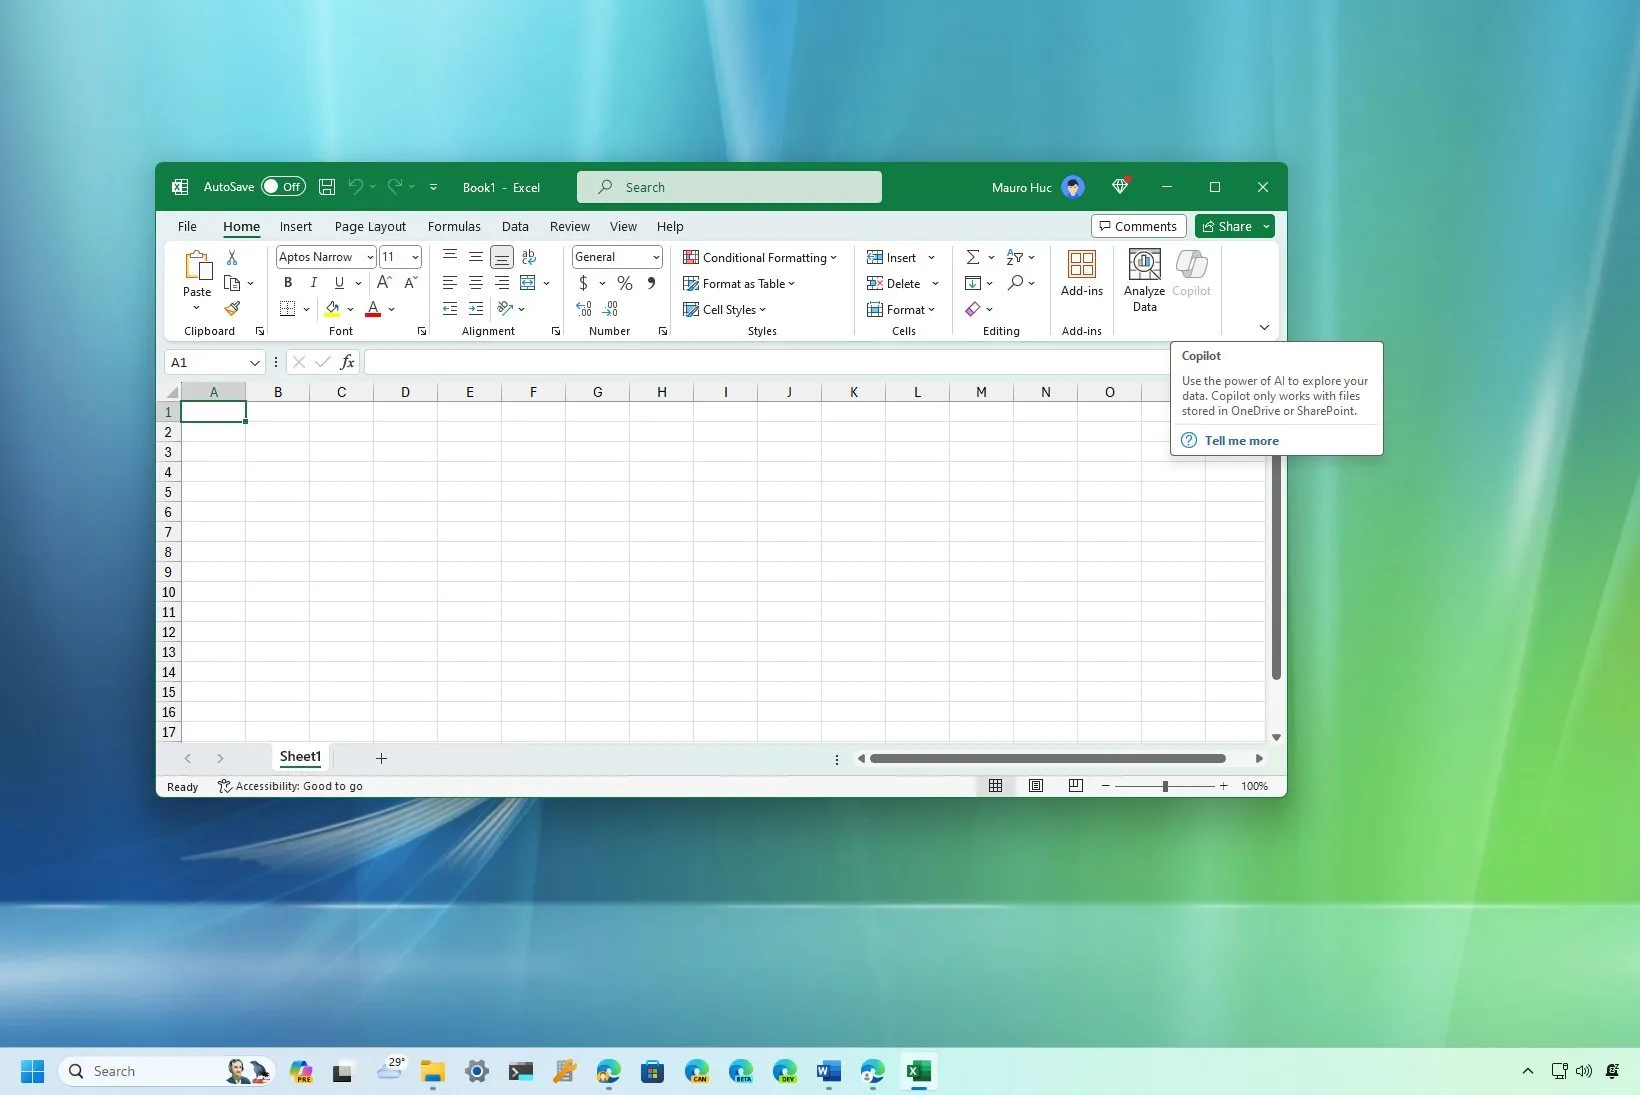 How to enable Copilot on Microsoft Excel - Pureinfotech